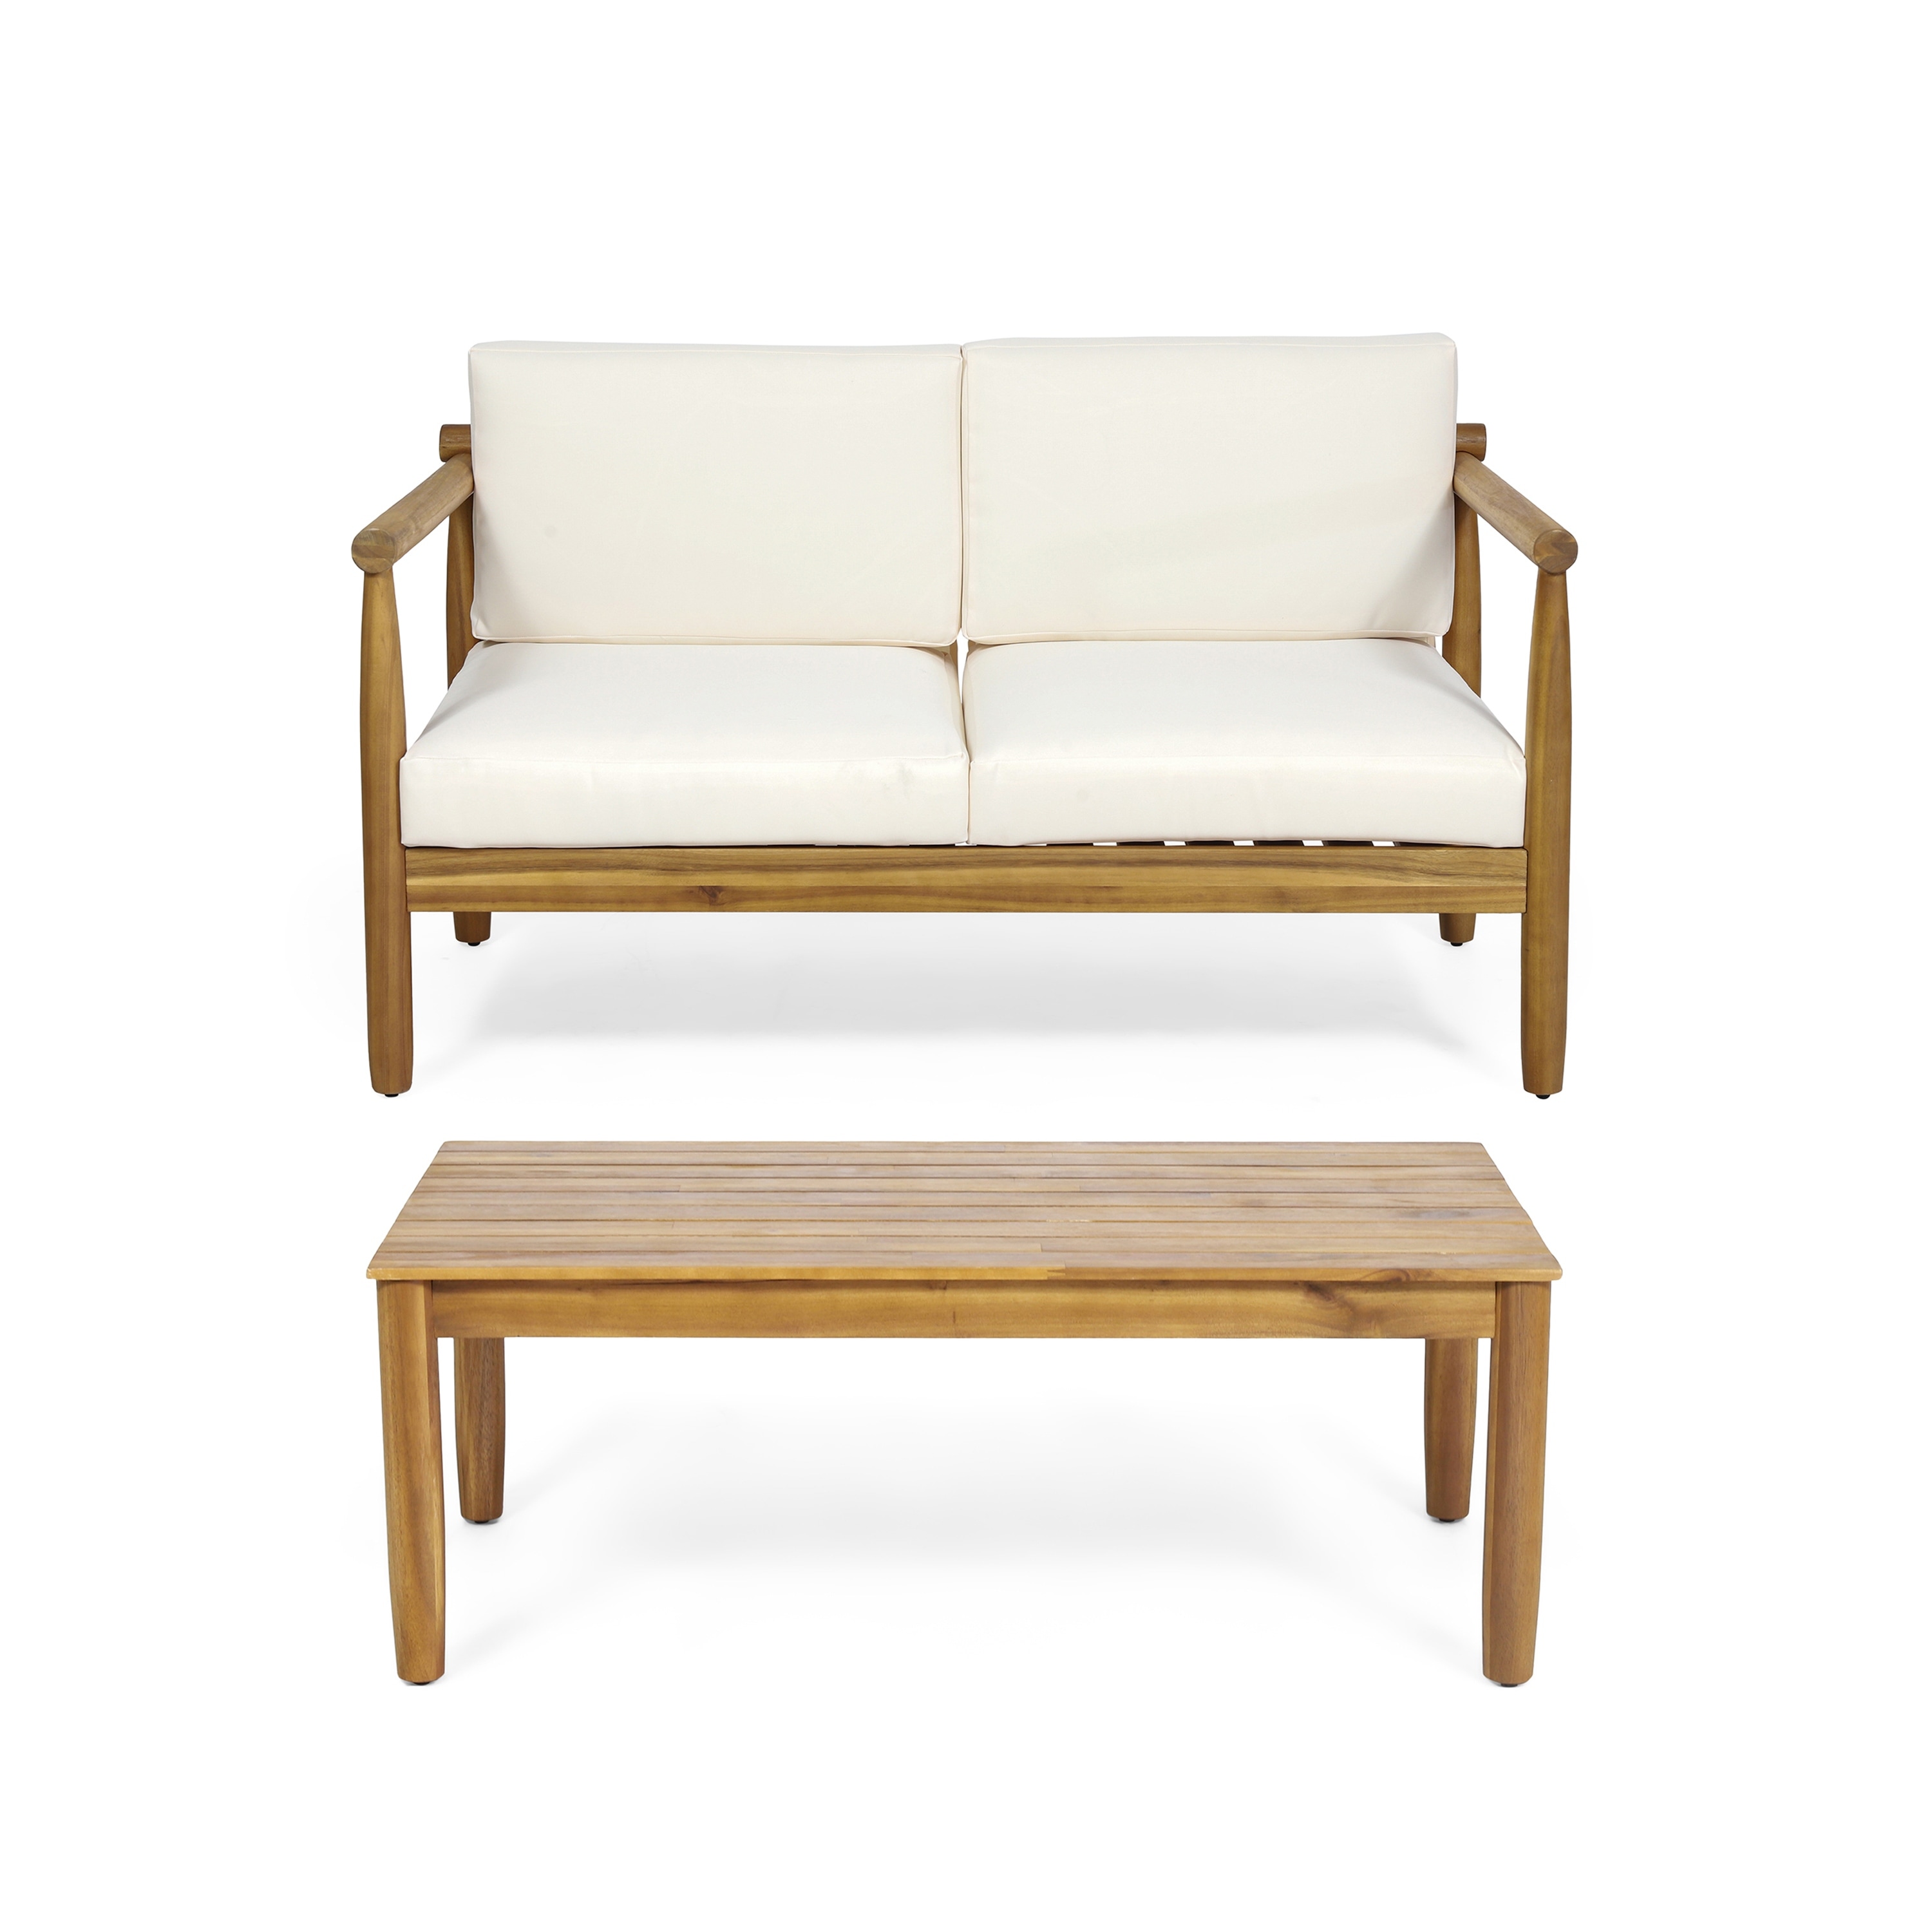 Bonsallo Acacia Wood Outdoor Loveseat And Coffee Table With Cushions By Christopher Knight Home